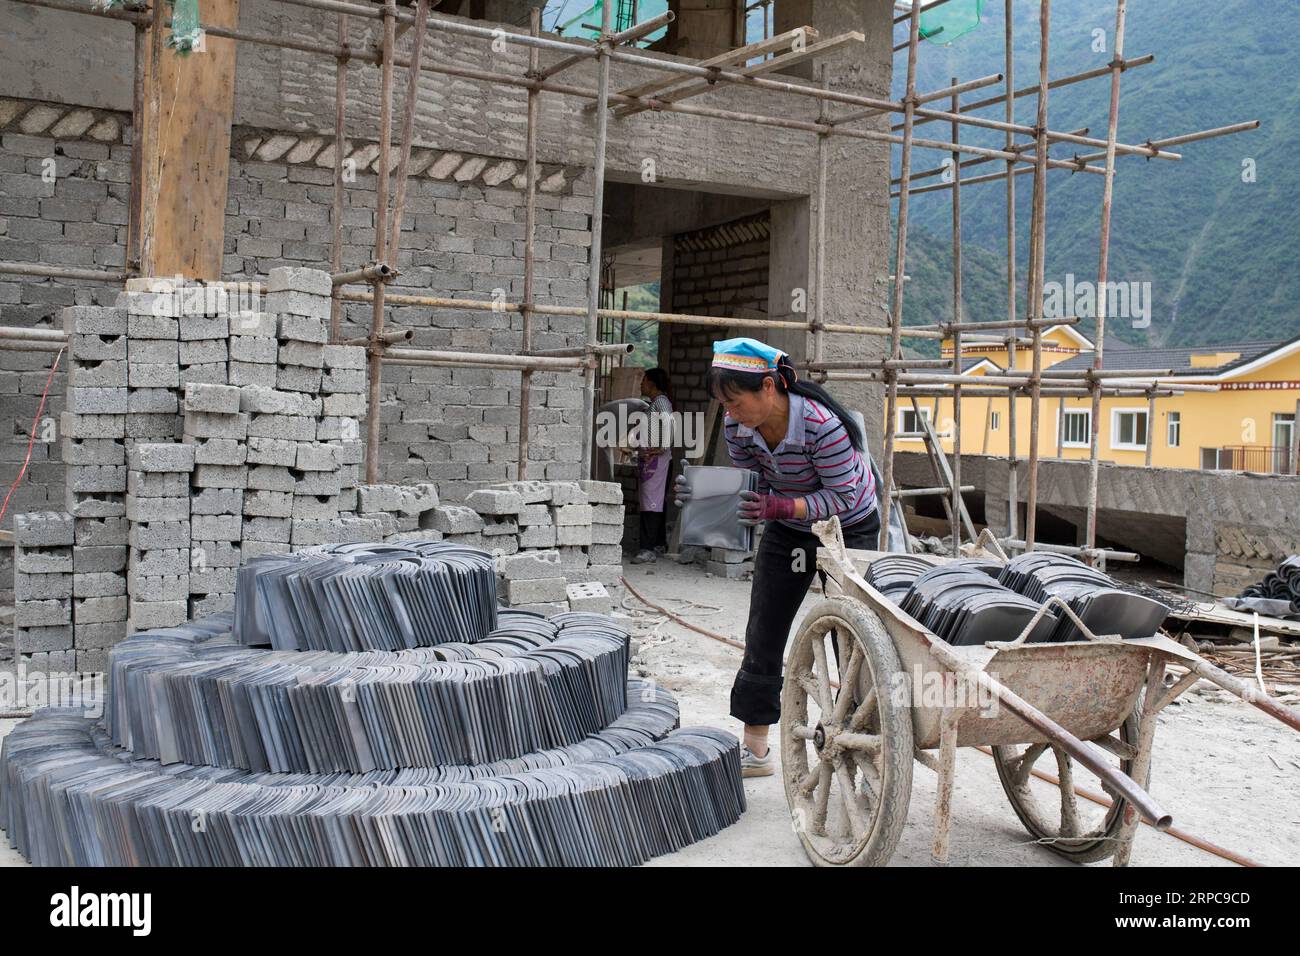 (190628) -- KUNMING, June 28, 2019 -- People work at a resettlement site for people of Lisu ethnic group in Daxingdi Town, Lisu Autonomous Prefecture of Nujiang, southwest China s Yunnan Province, June 26, 2019. Lisu people have been relocated to a new community from unlivable mountain areas thanks to the poverty alleviation policy by local government. Zhiguo minorities are special members of China s 56 ethnic groups. The term Zhiguo refers to minority groups who, before modernization, had lived in relative isolation and skipped the transition period associated with feudal monarchy. Yunnan is Stock Photo